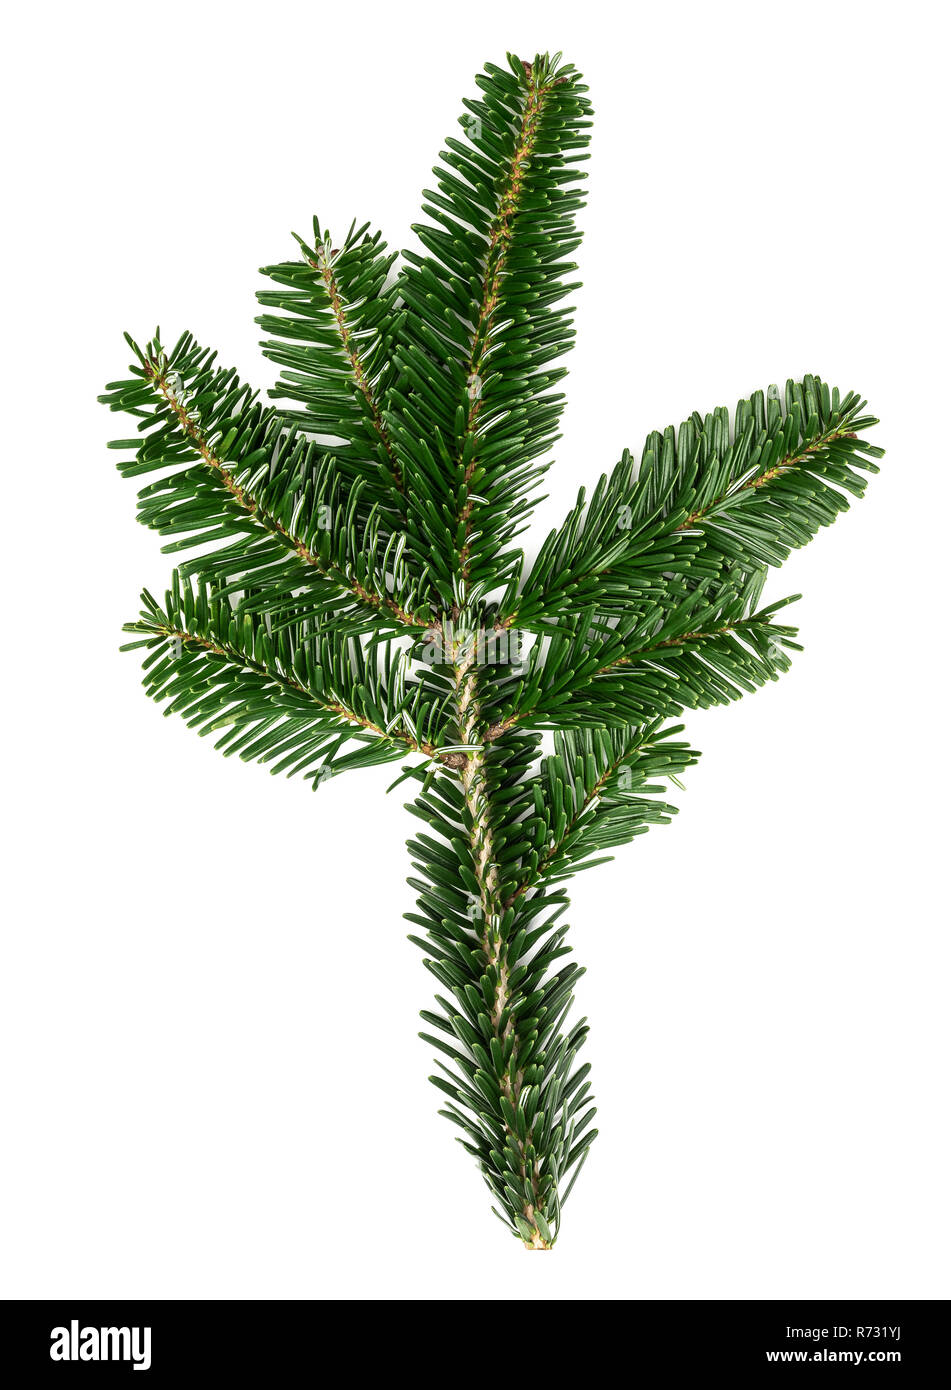 fir twig or branch isolated on white background Stock Photo